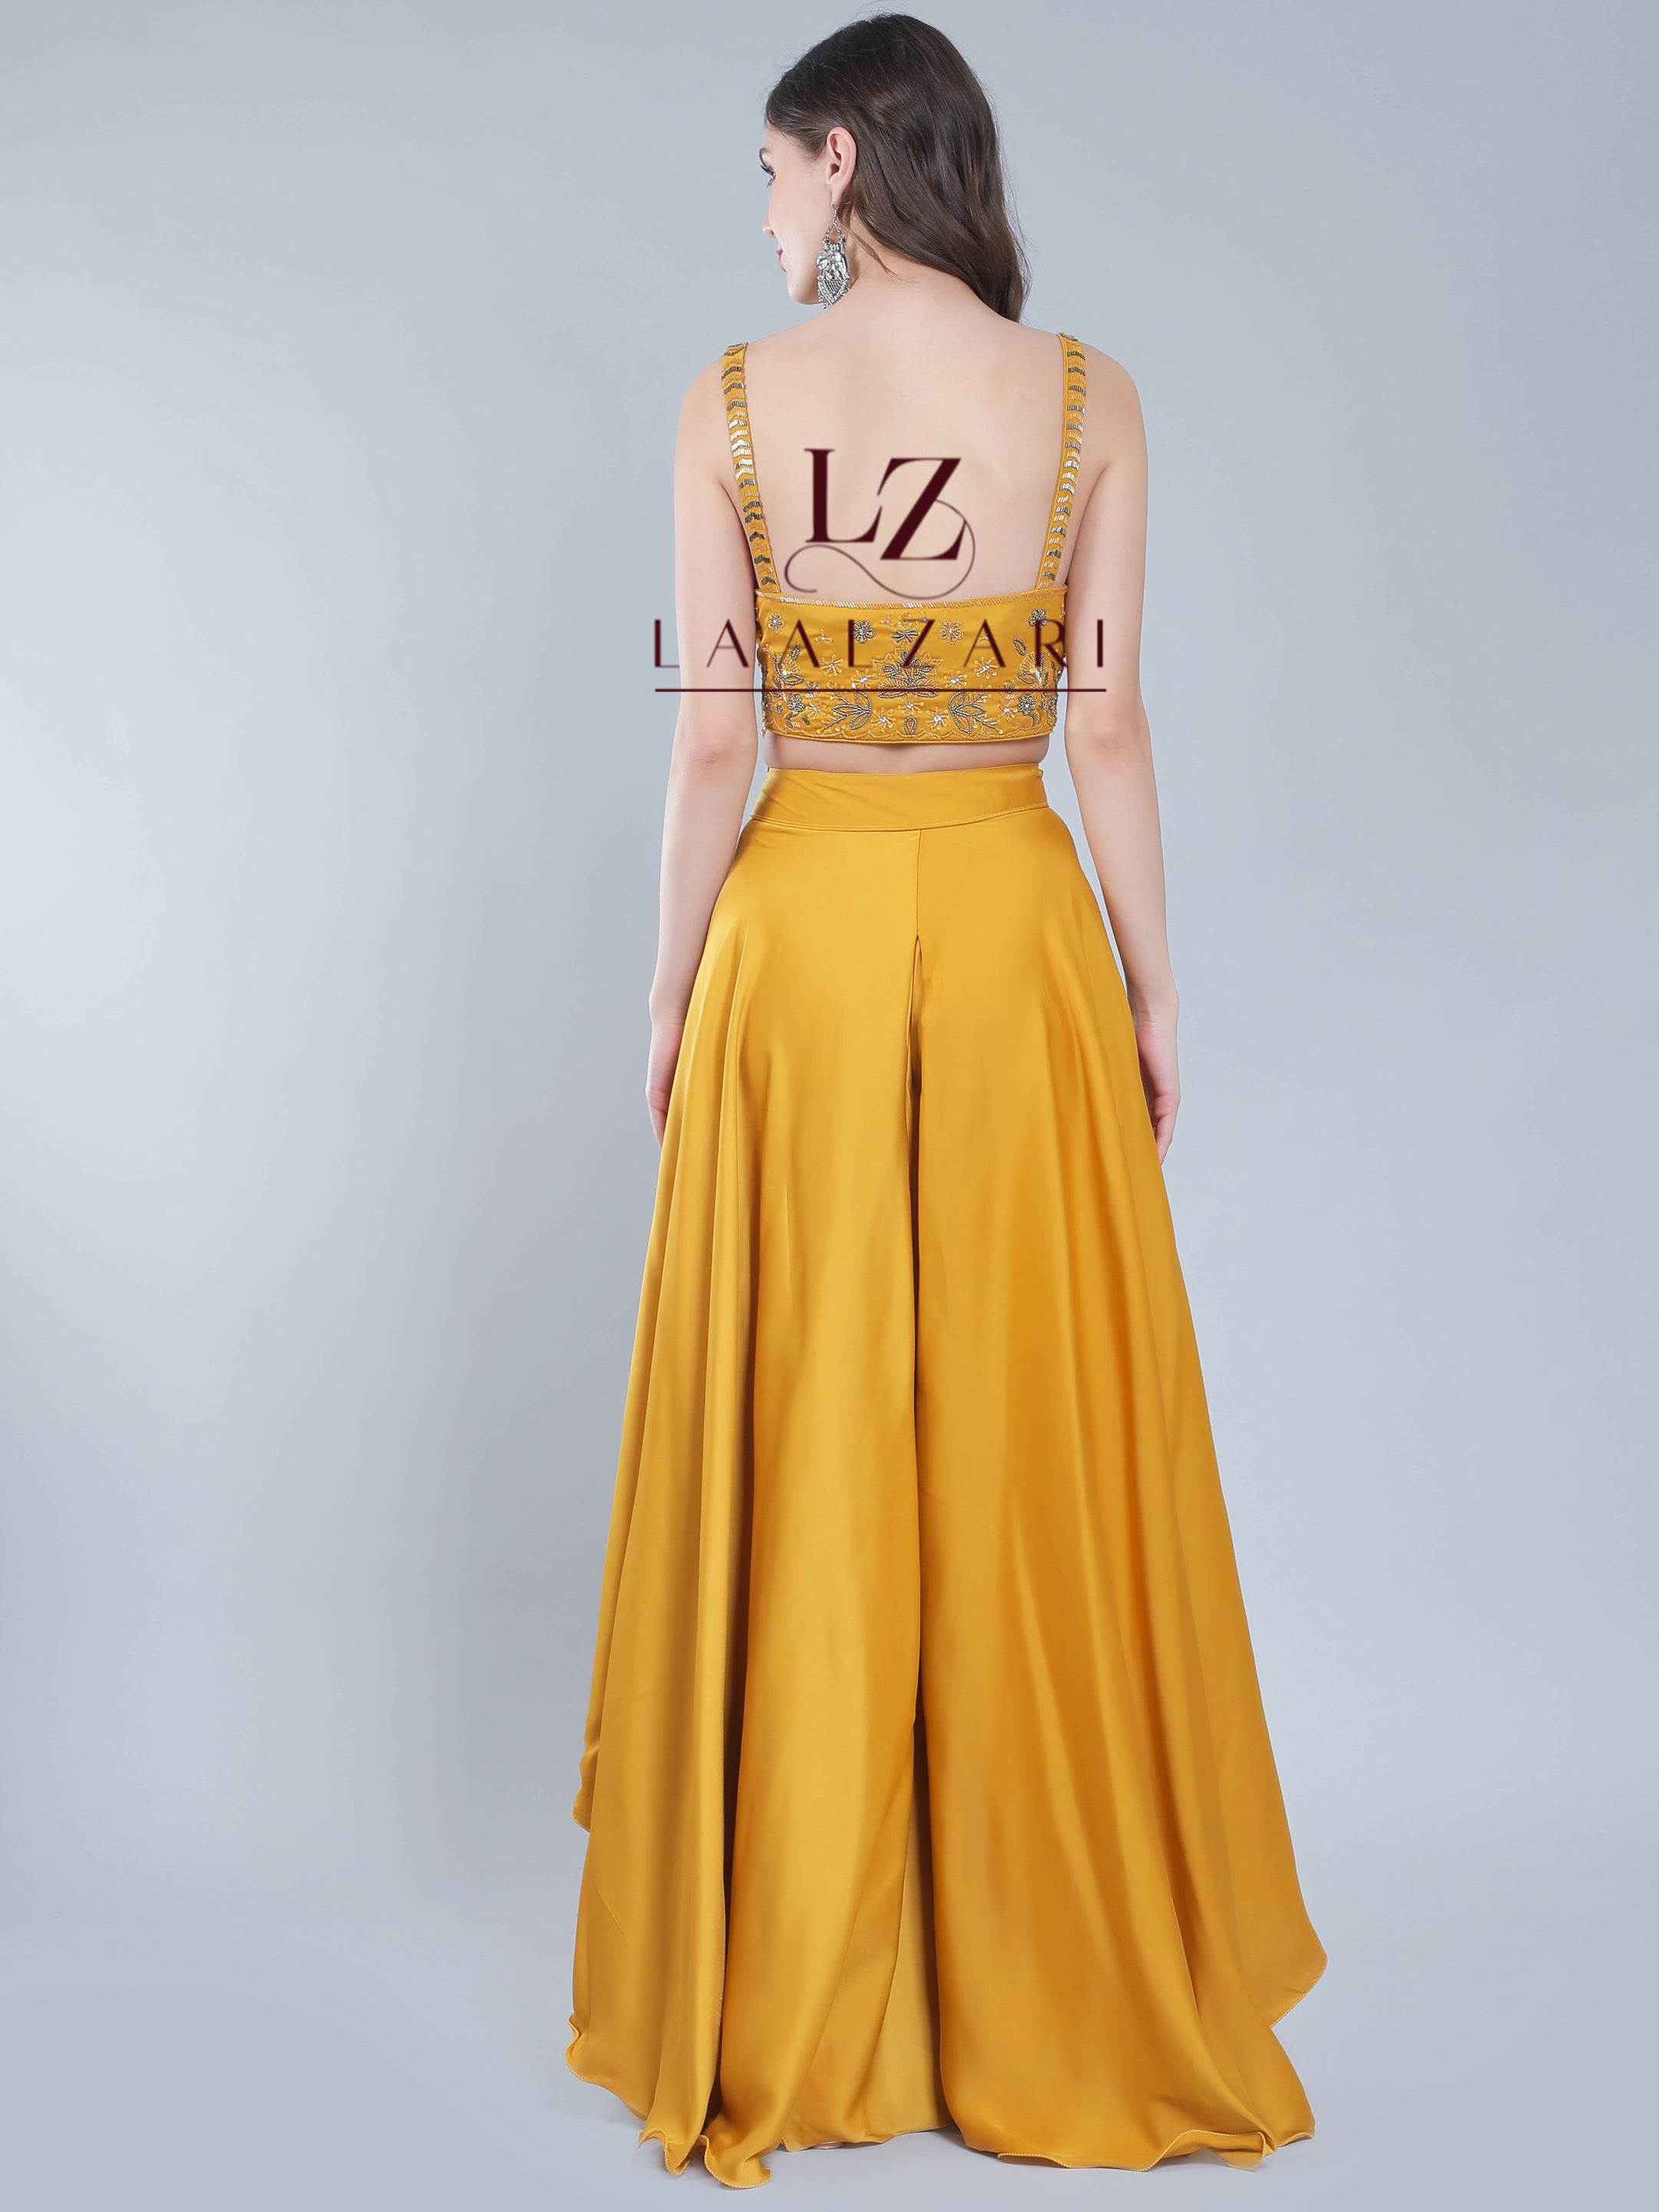 Buy Cut and Style Women High Waist Casual Wide Leg Palazzo Pants, Dress  Pants for Women, Free Size (28 Till 36) (Mustard) at Amazon.in